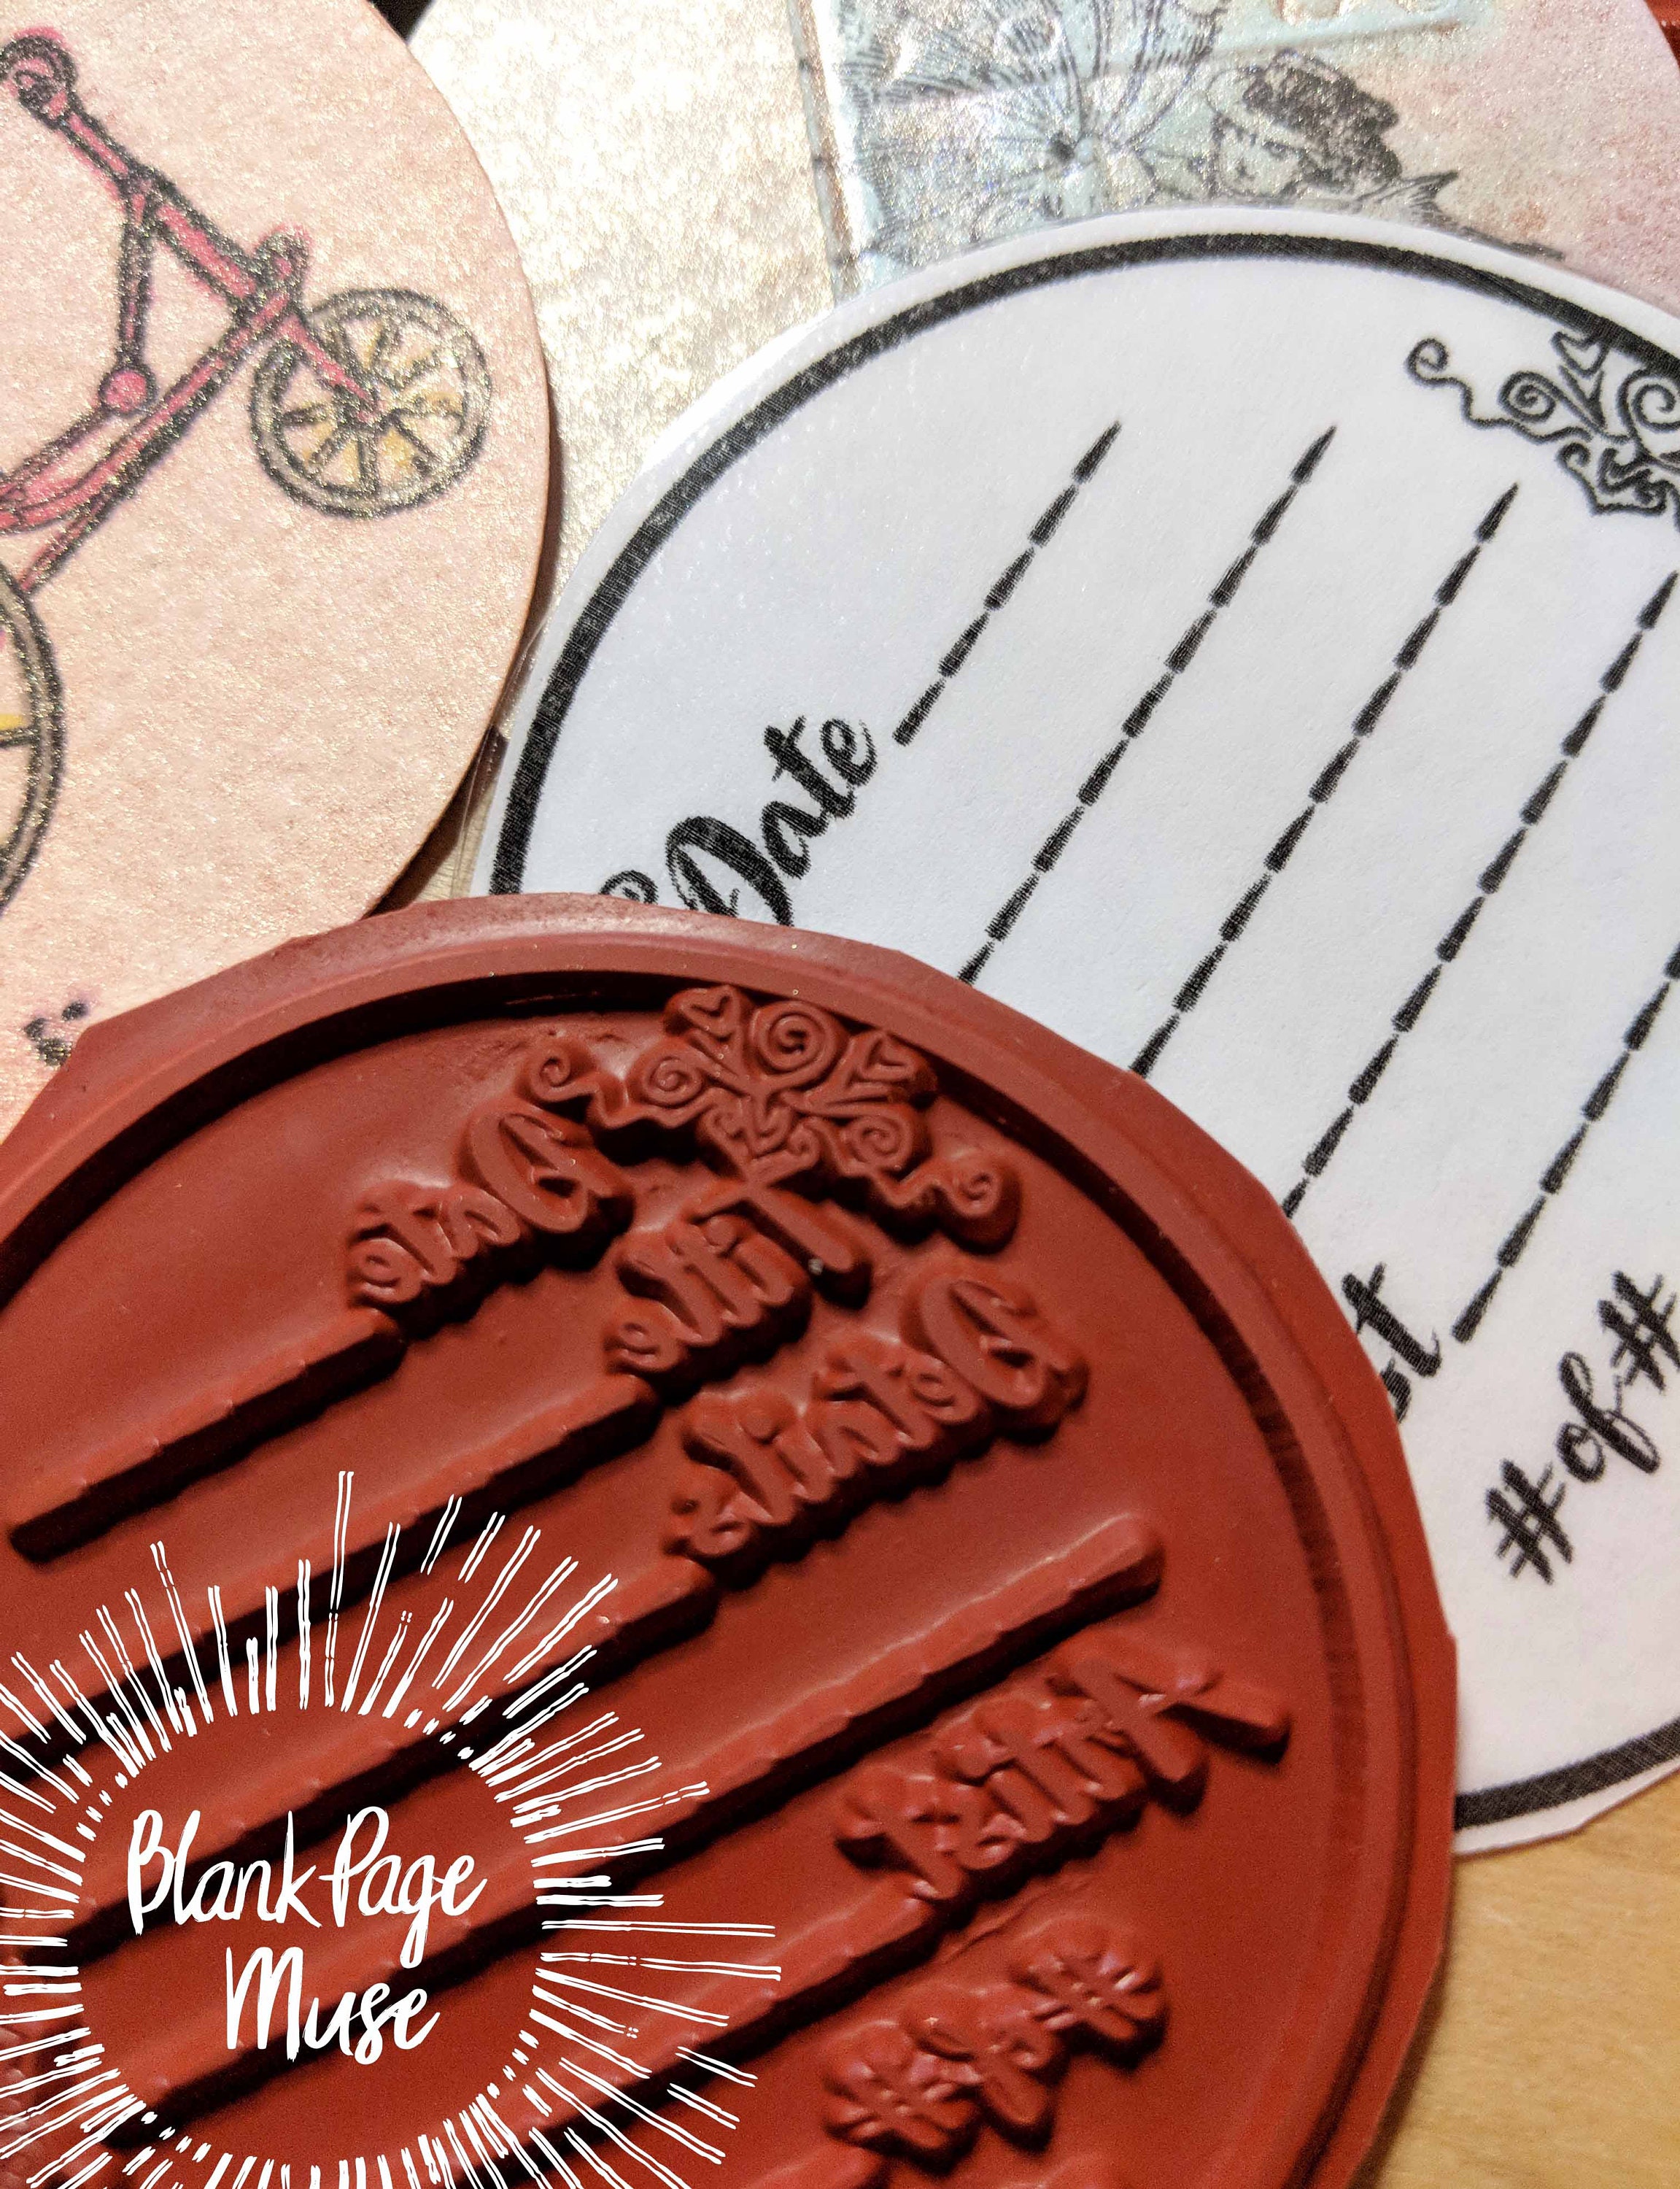 Happy Birthday! Word Rubber Stamp by Pam Bray Designs - Blank Page Muse Art  Rubber Stamps